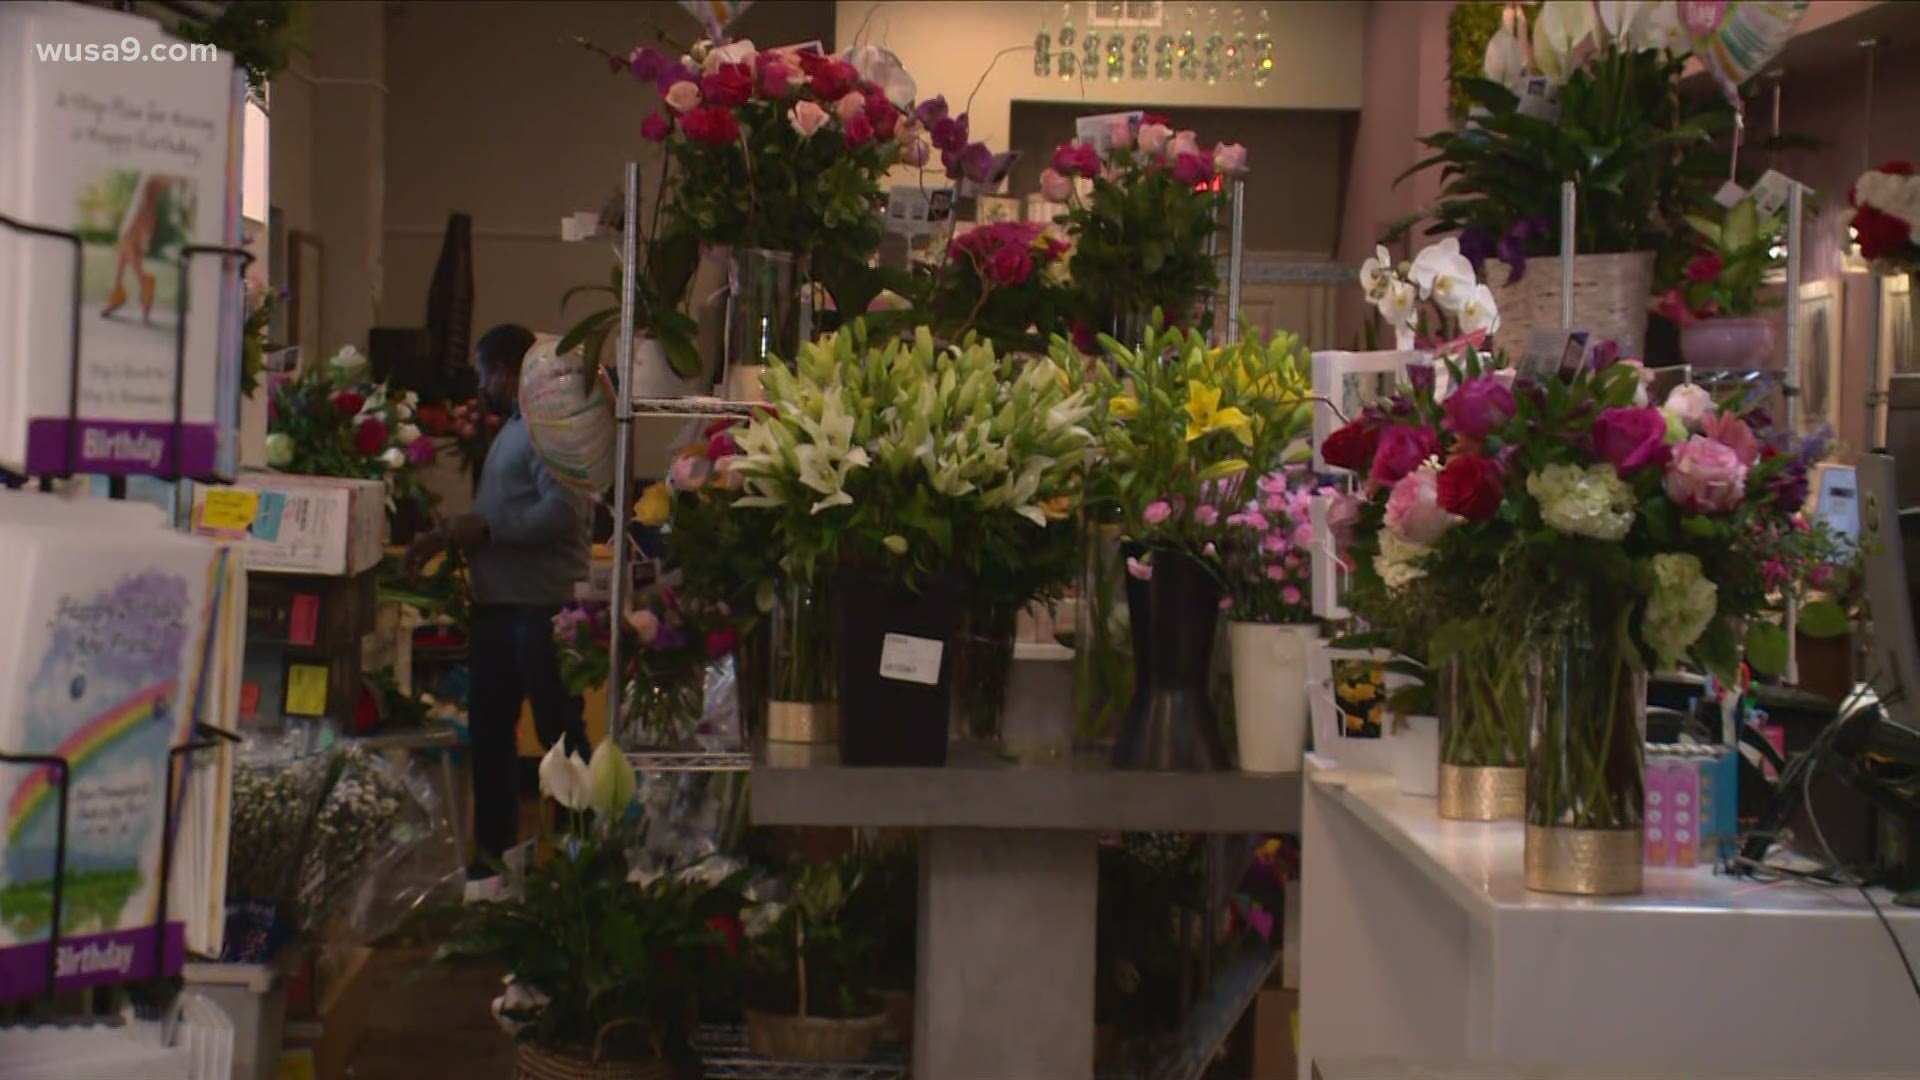 The co-owner of Lee’s Flower Shop in D.C. said it's a tough situation all florists are dealing with.